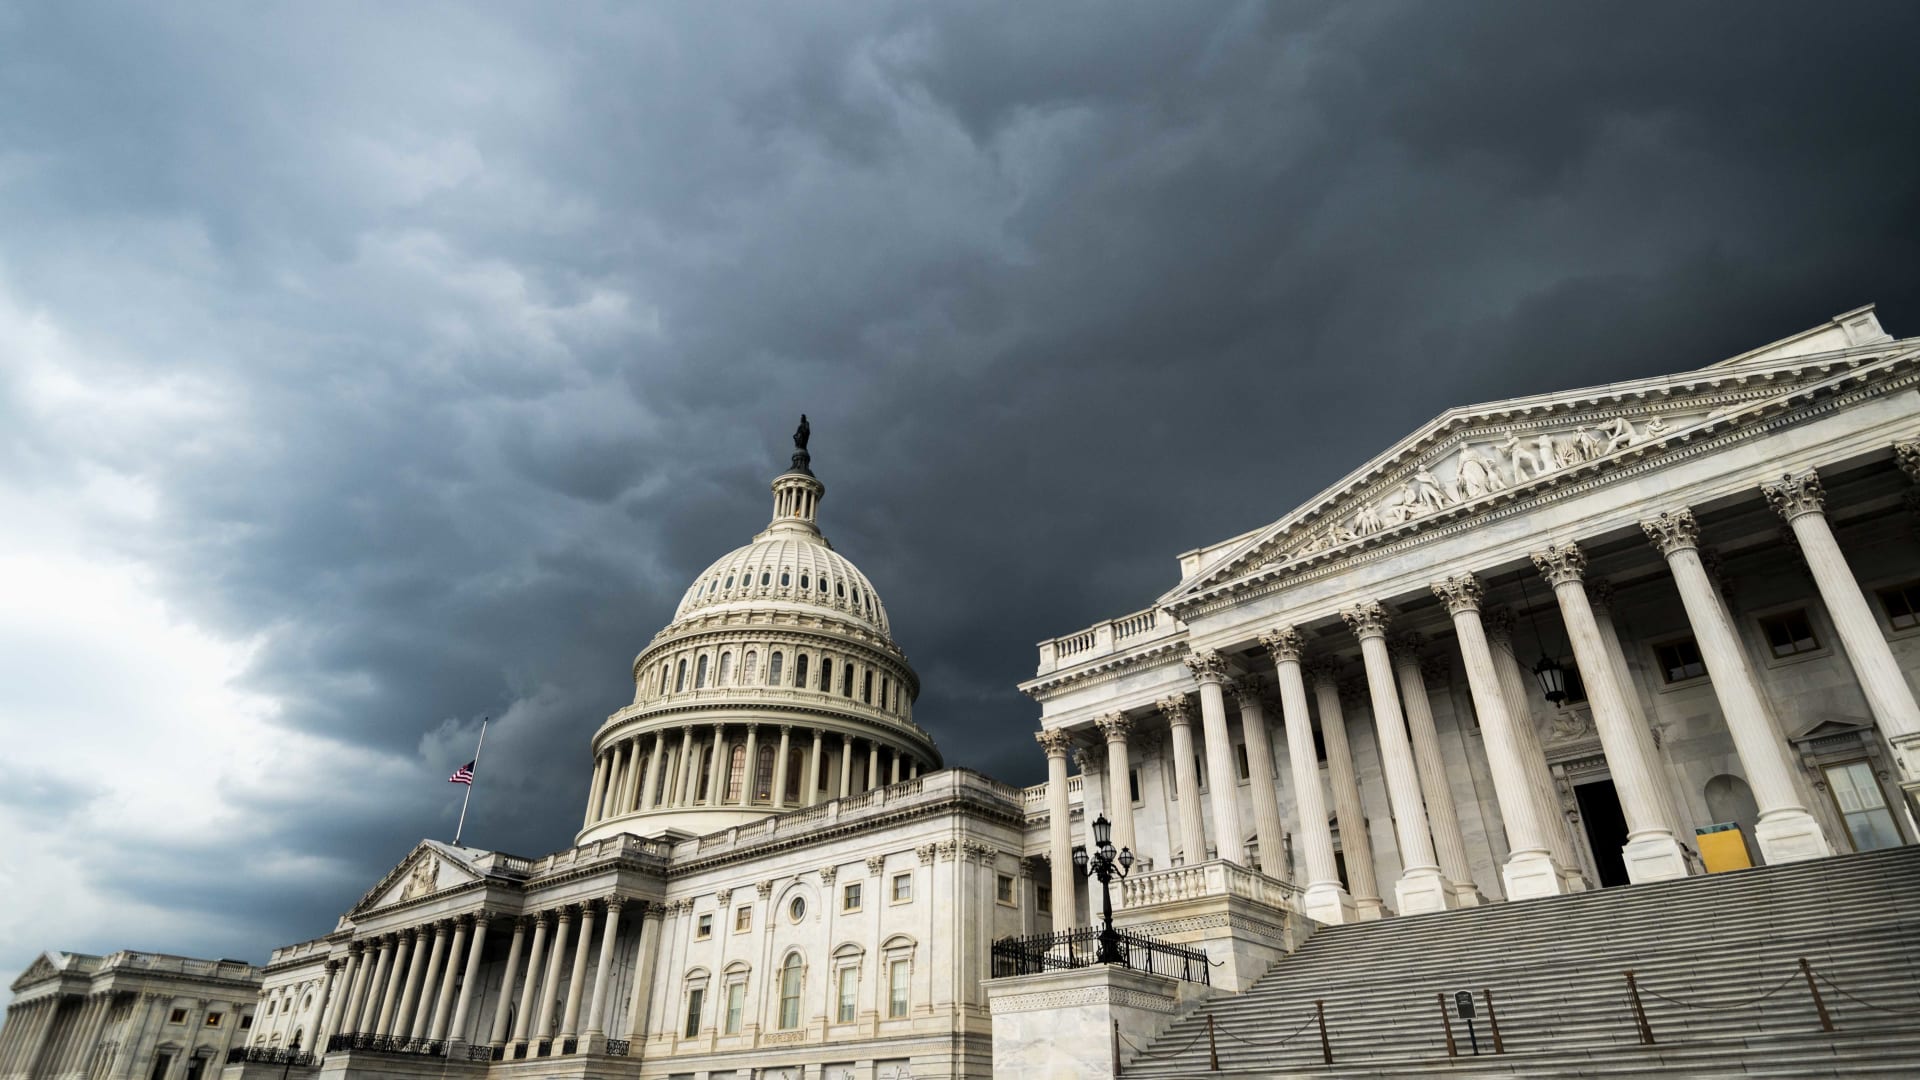 This Is Not a Disaster Movie. If Congress Doesn't Act, Though, It Could Start to Feel That Way